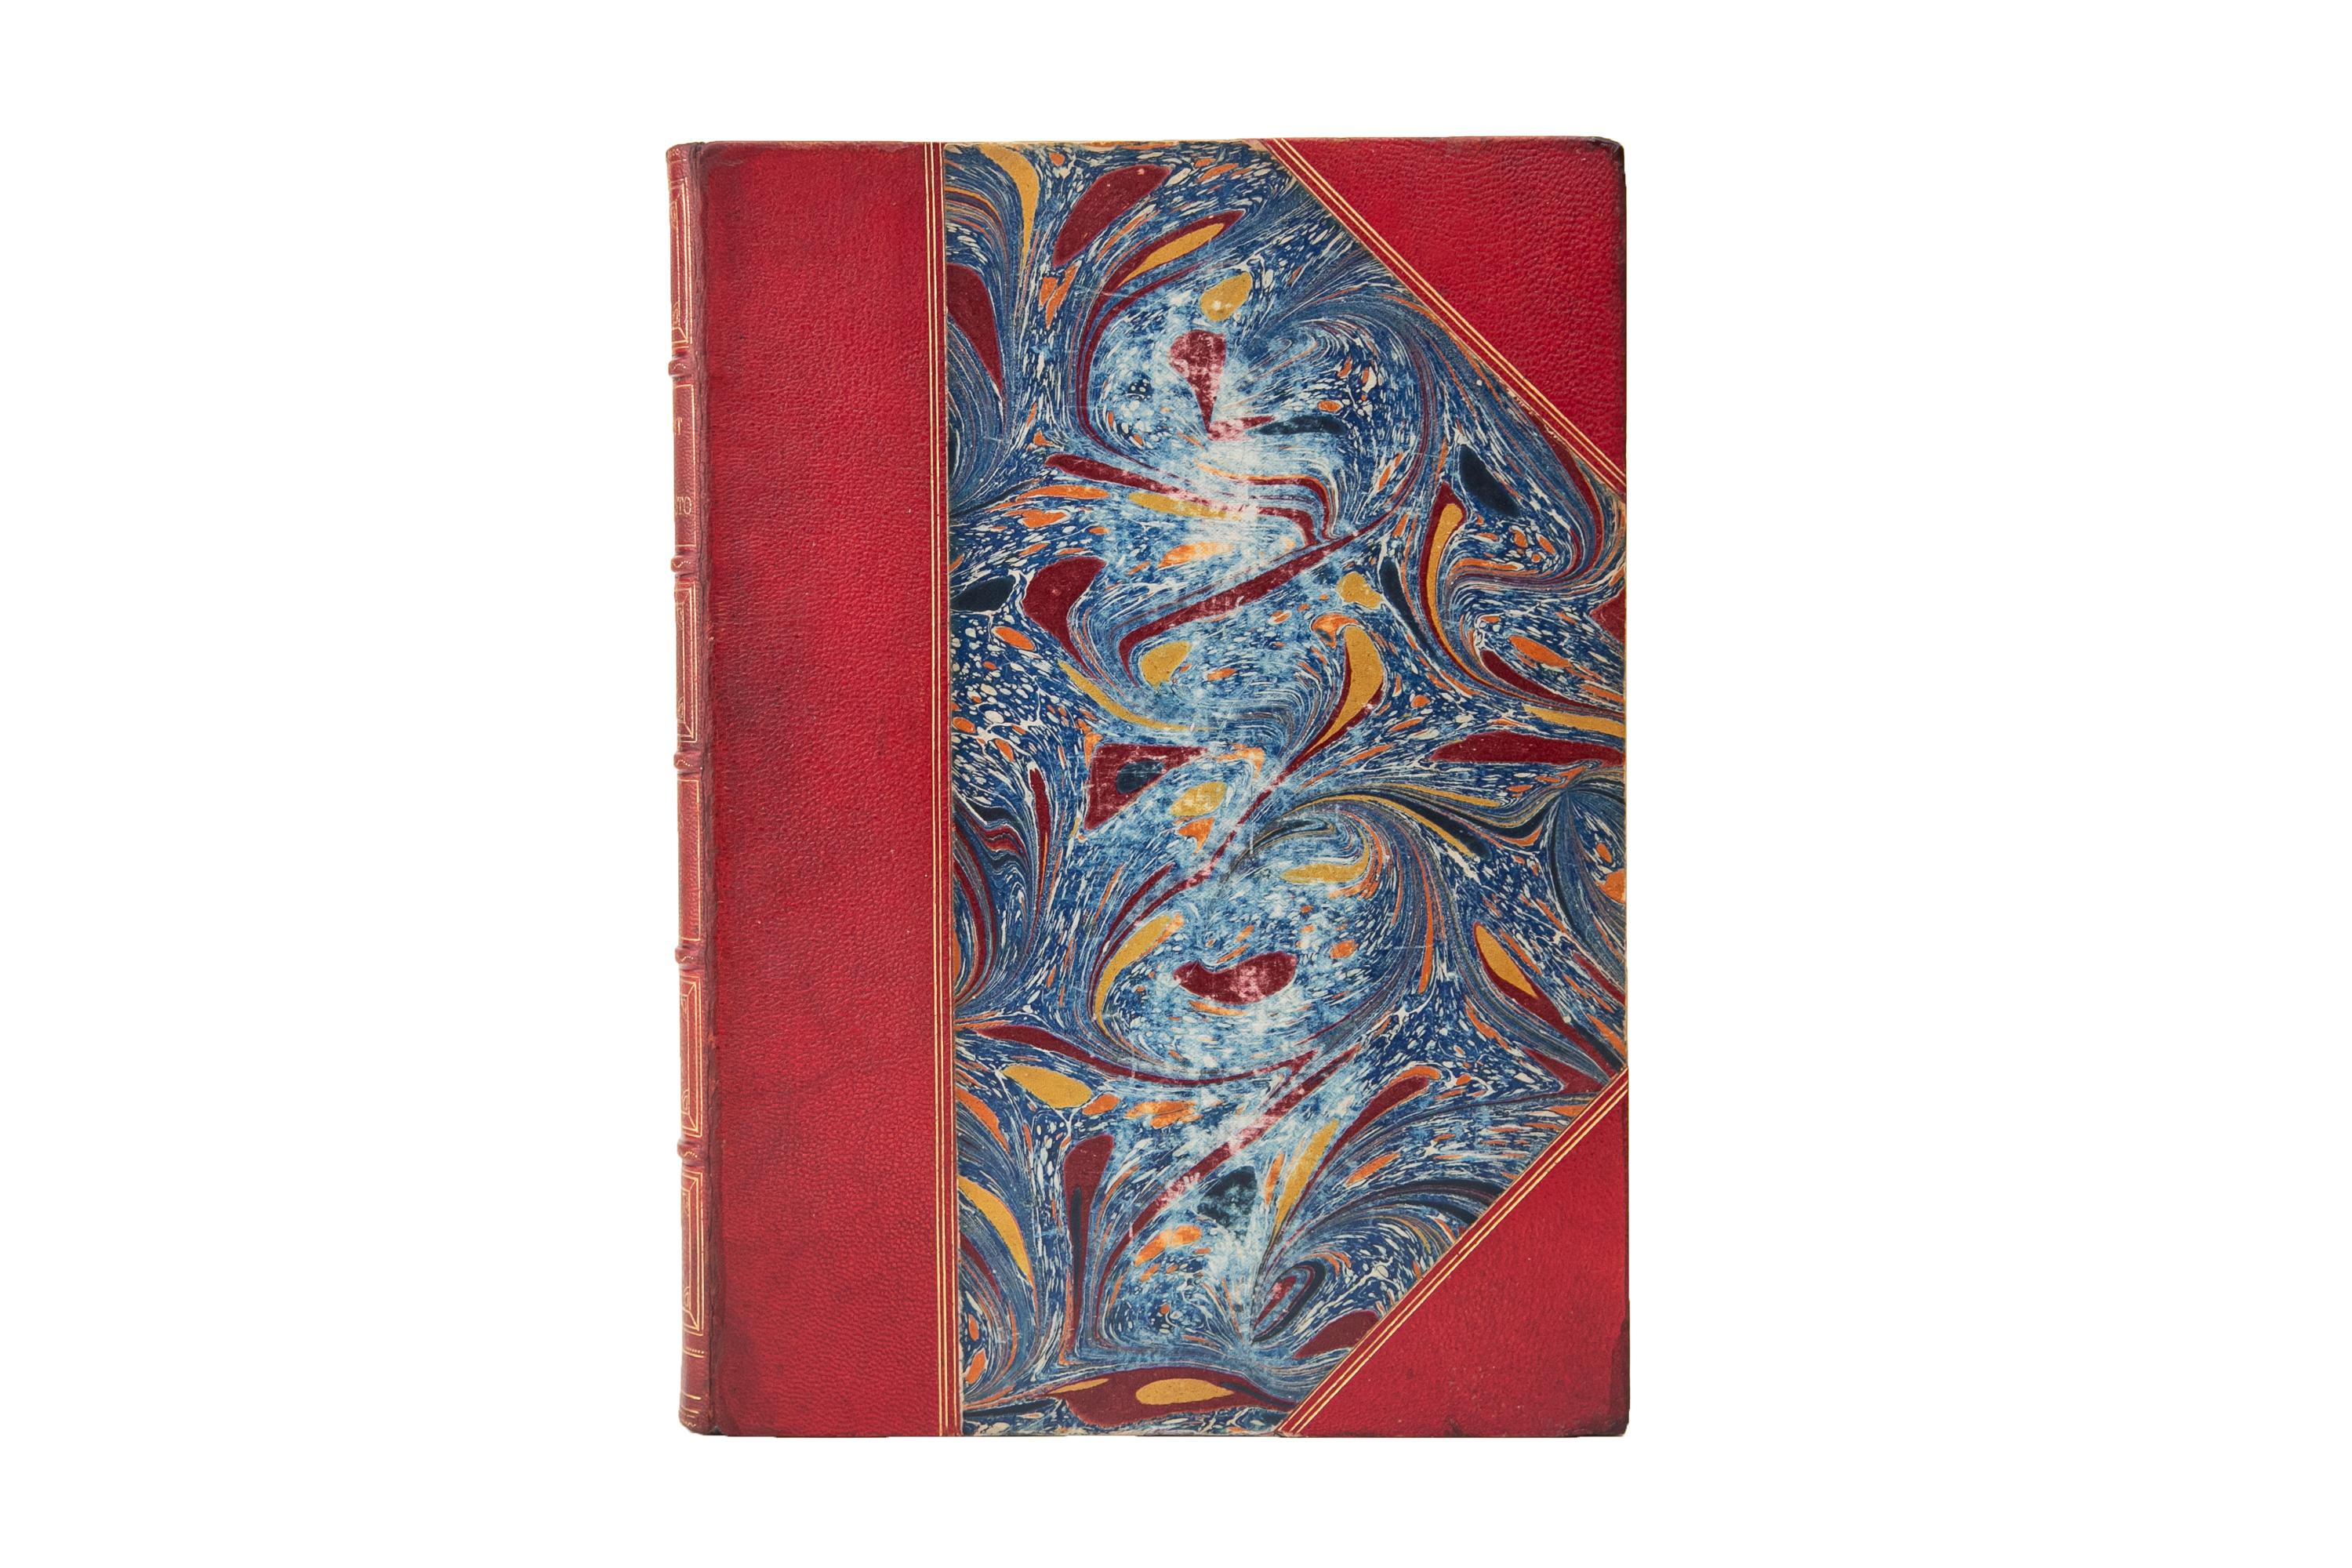 5 Volumes. Alexandre Dumas, The Count of Monte-Cristo. Bound in 3/4 red morocco and marbled boards, bordered in gilt-tooling. The spines display raised bands and gilt-tooled panel details. The top edges are gilt with marbled endpapers. Includes